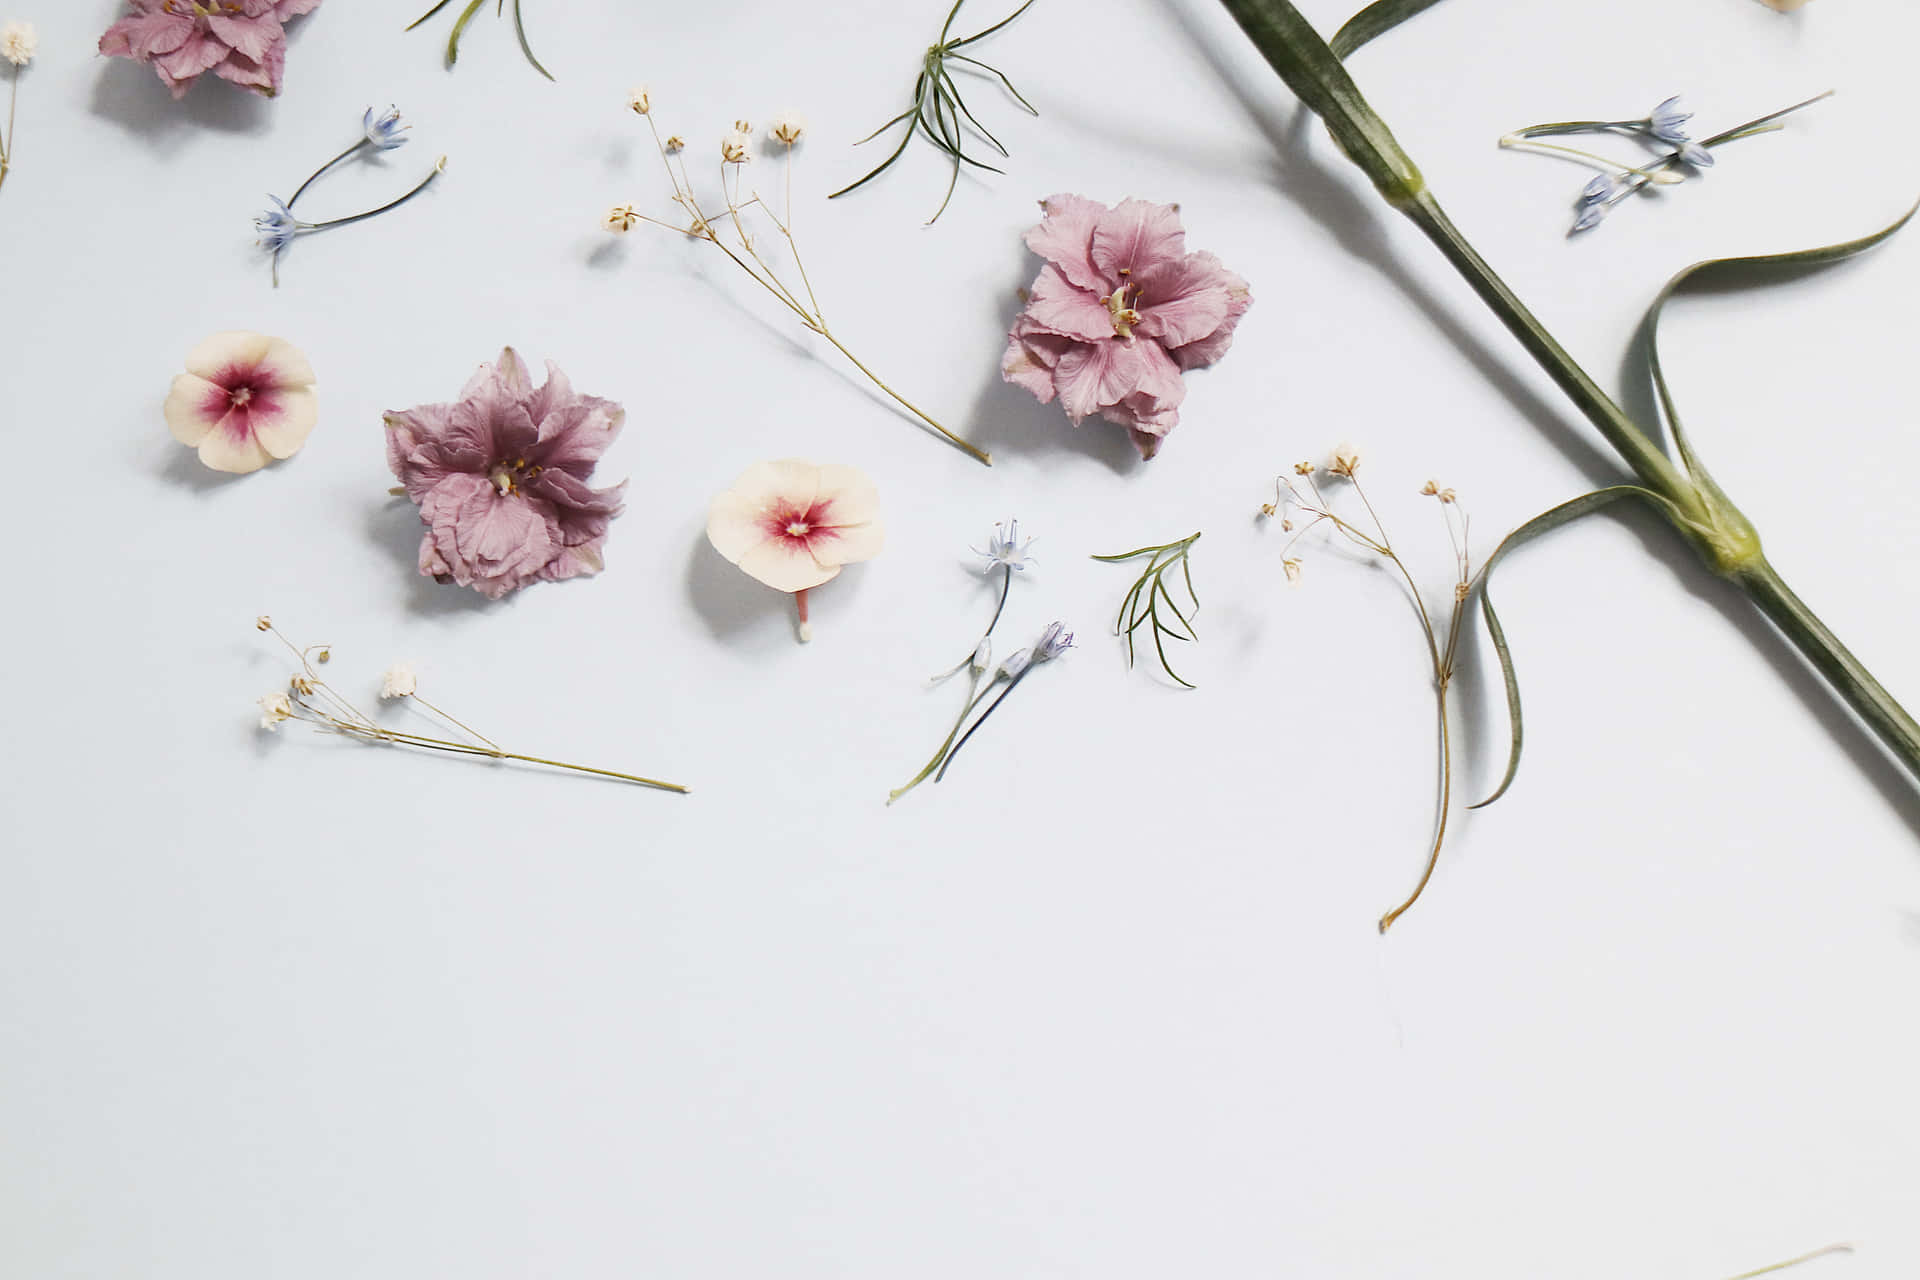 Flowers And Leaves On A White Background Wallpaper